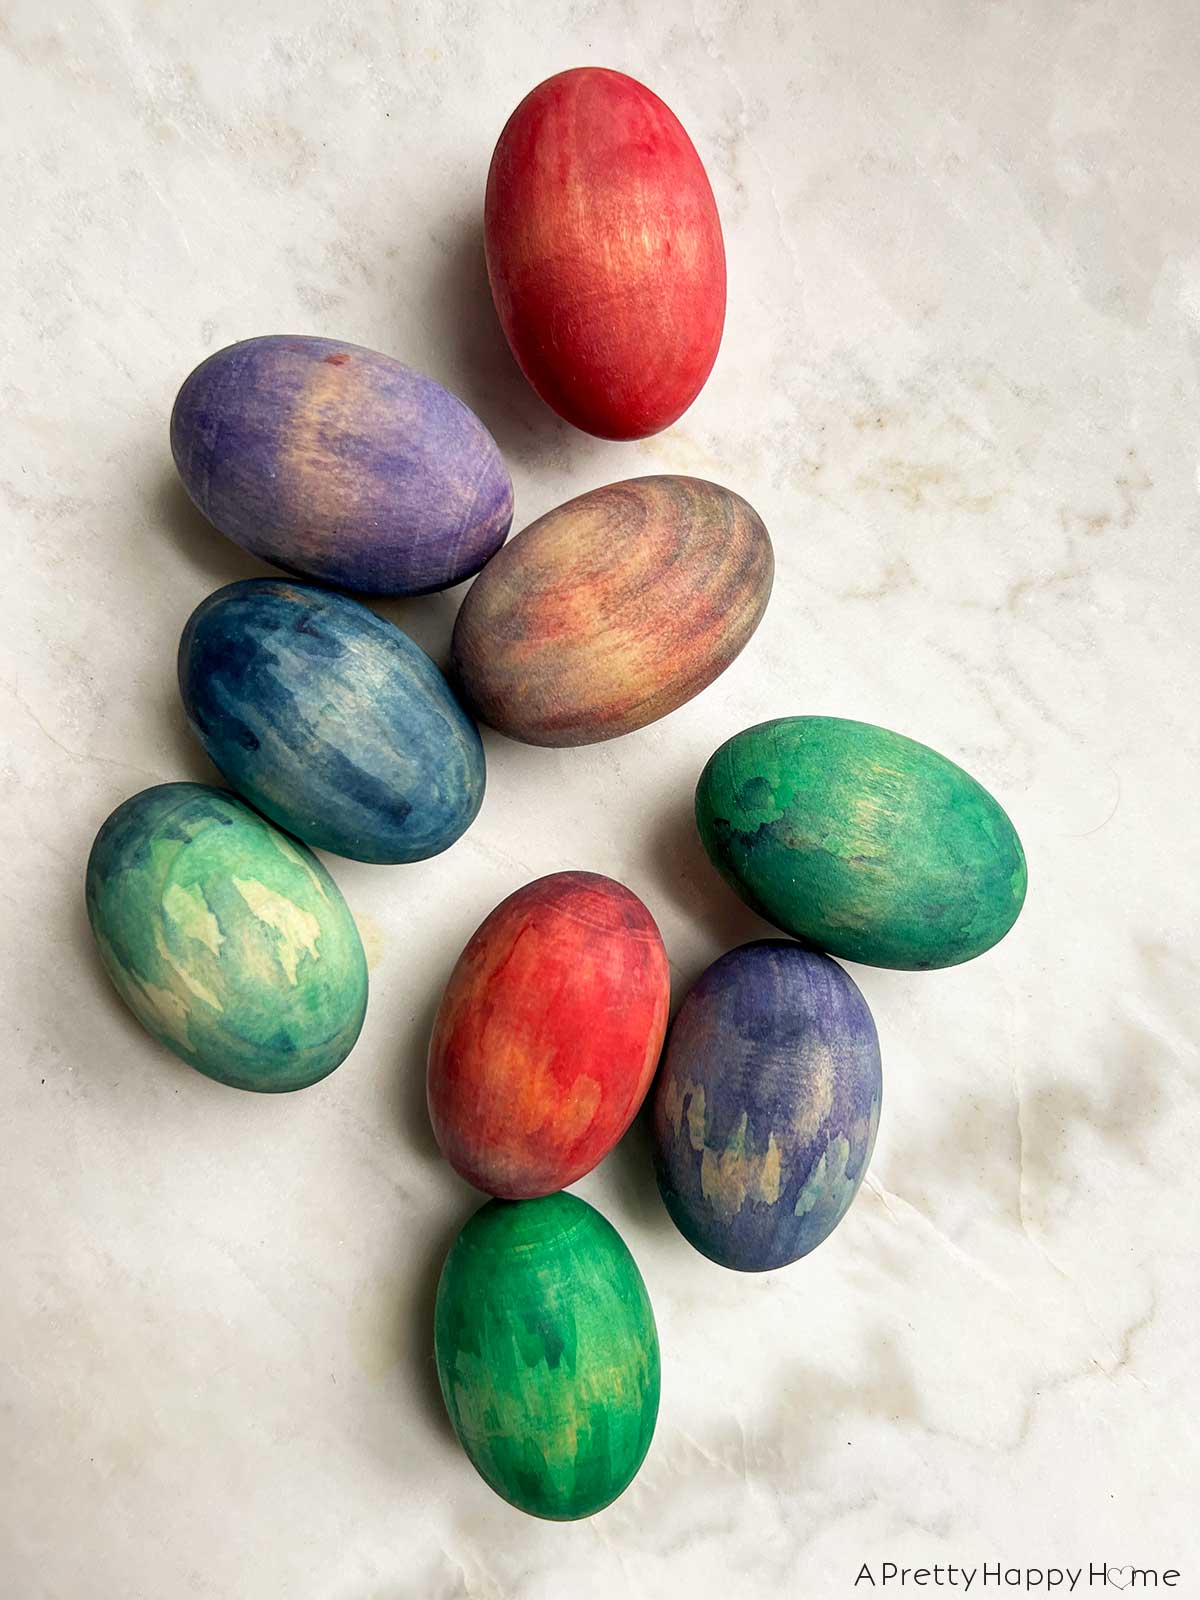 7 Ways To Decorate Wood Easter Eggs decorate wood eggs with watercolor paint or a paint wash so the wood grain still shows